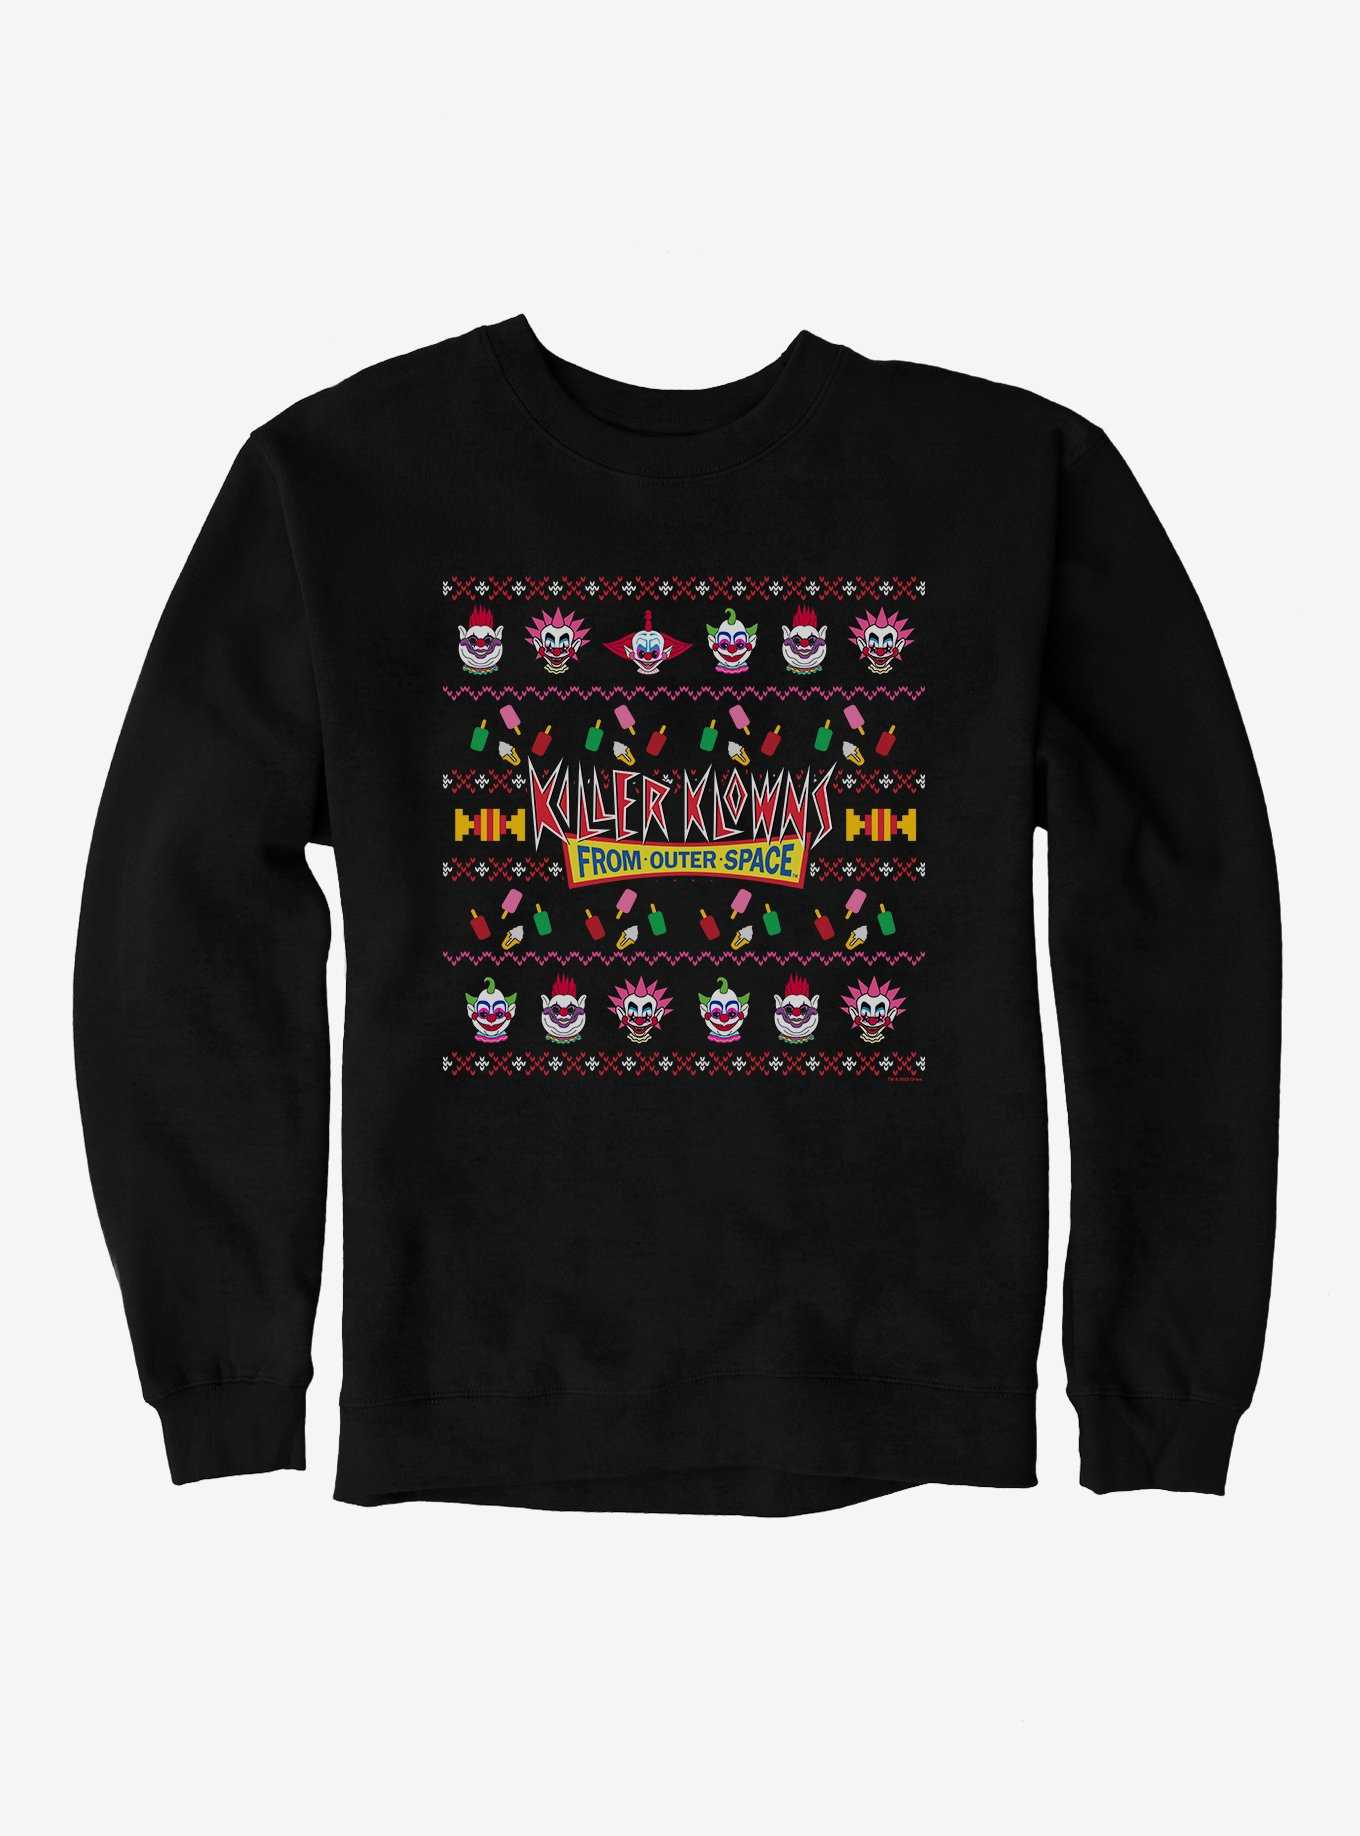 Killer Klowns From Outer Space Ugly Christmas Sweater Pattern Sweatshirt, , hi-res